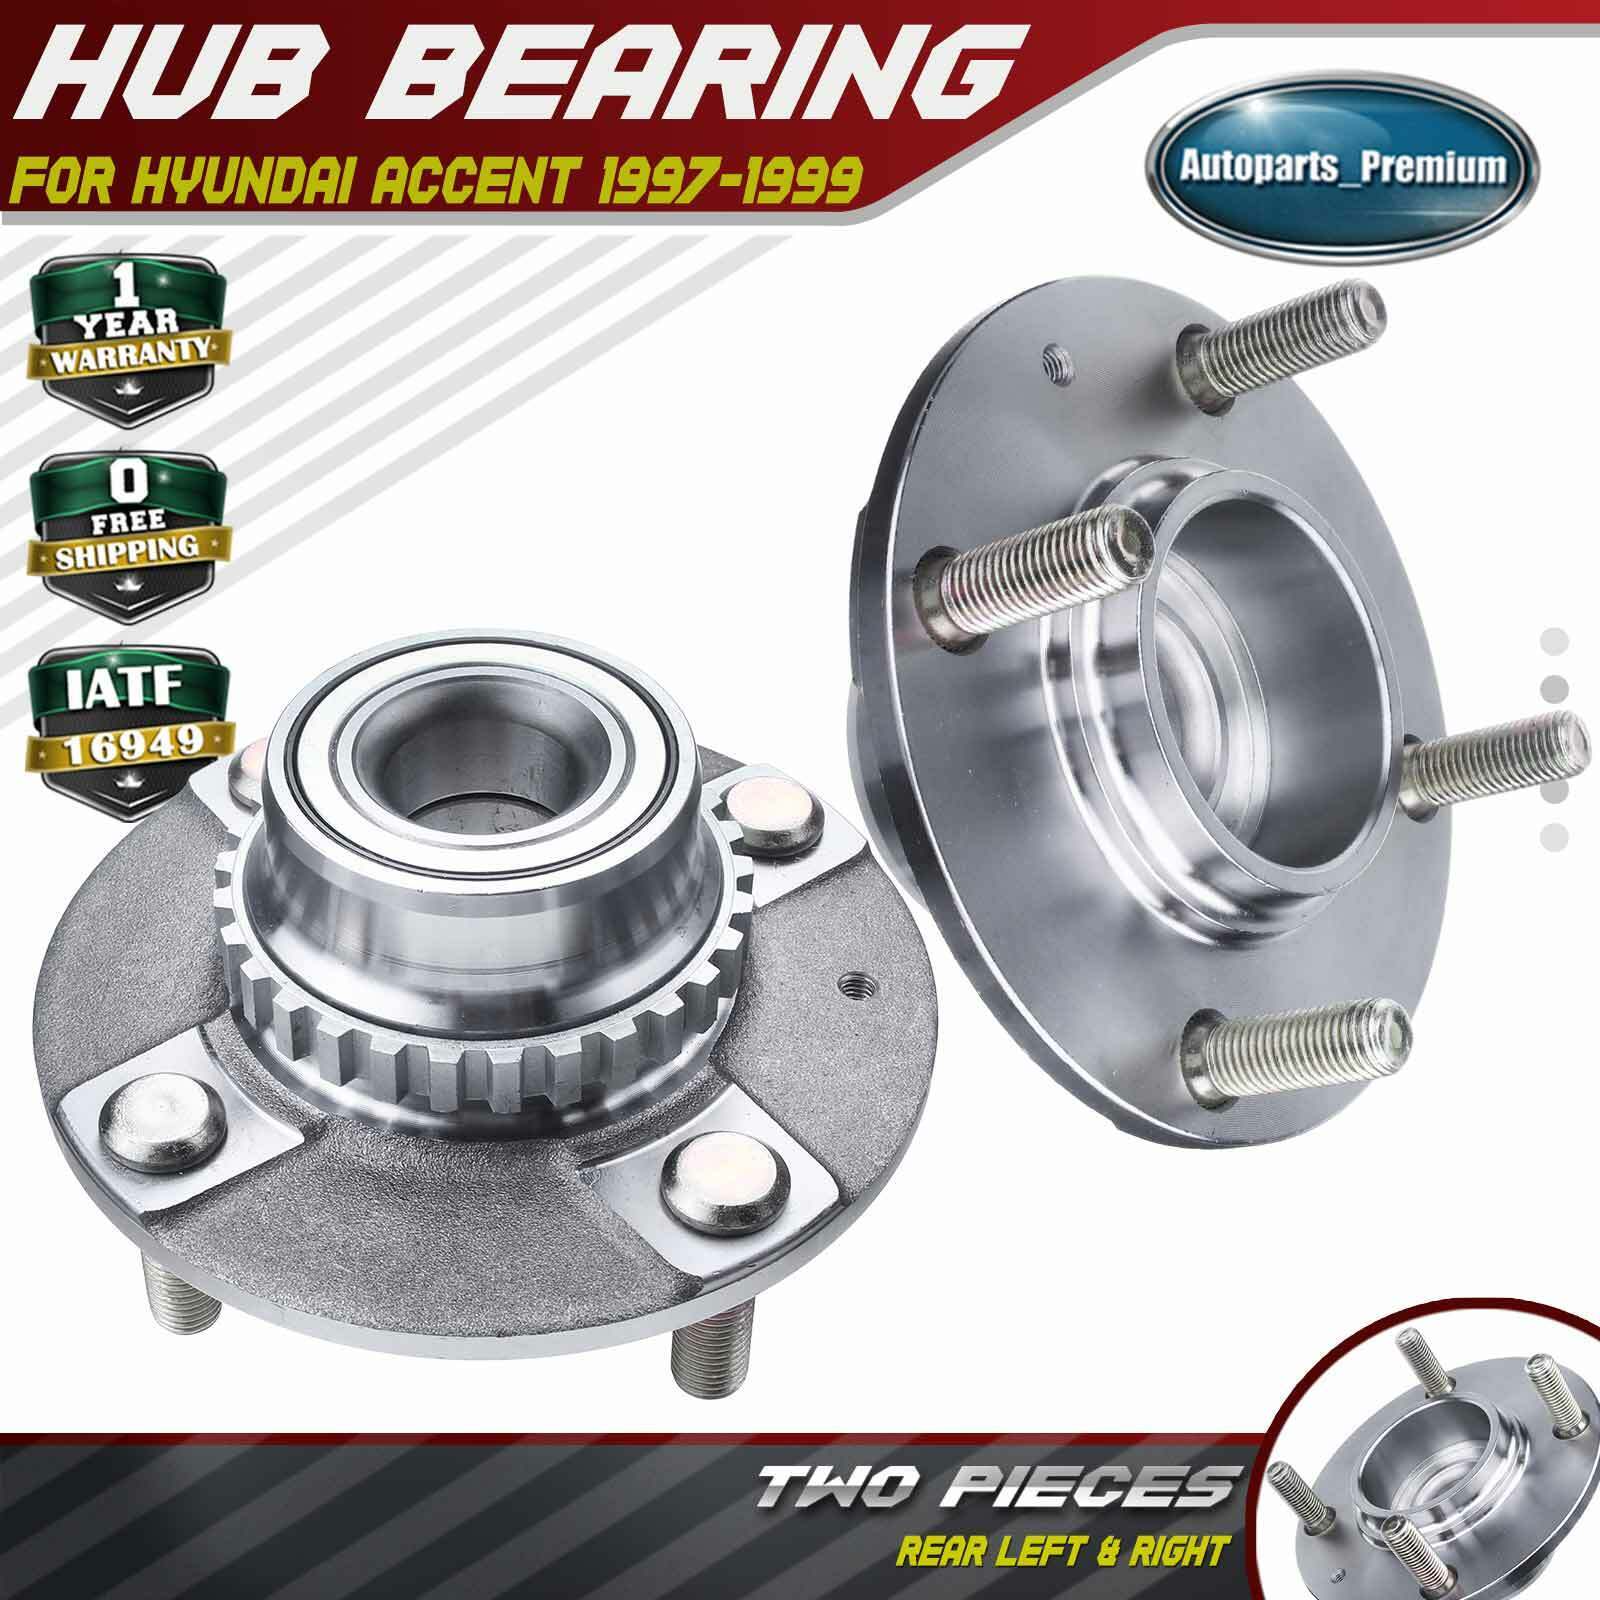 2x New Rear Left & Right Wheel Bearing Hub Assembly for Hyundai Accent 1997-1999